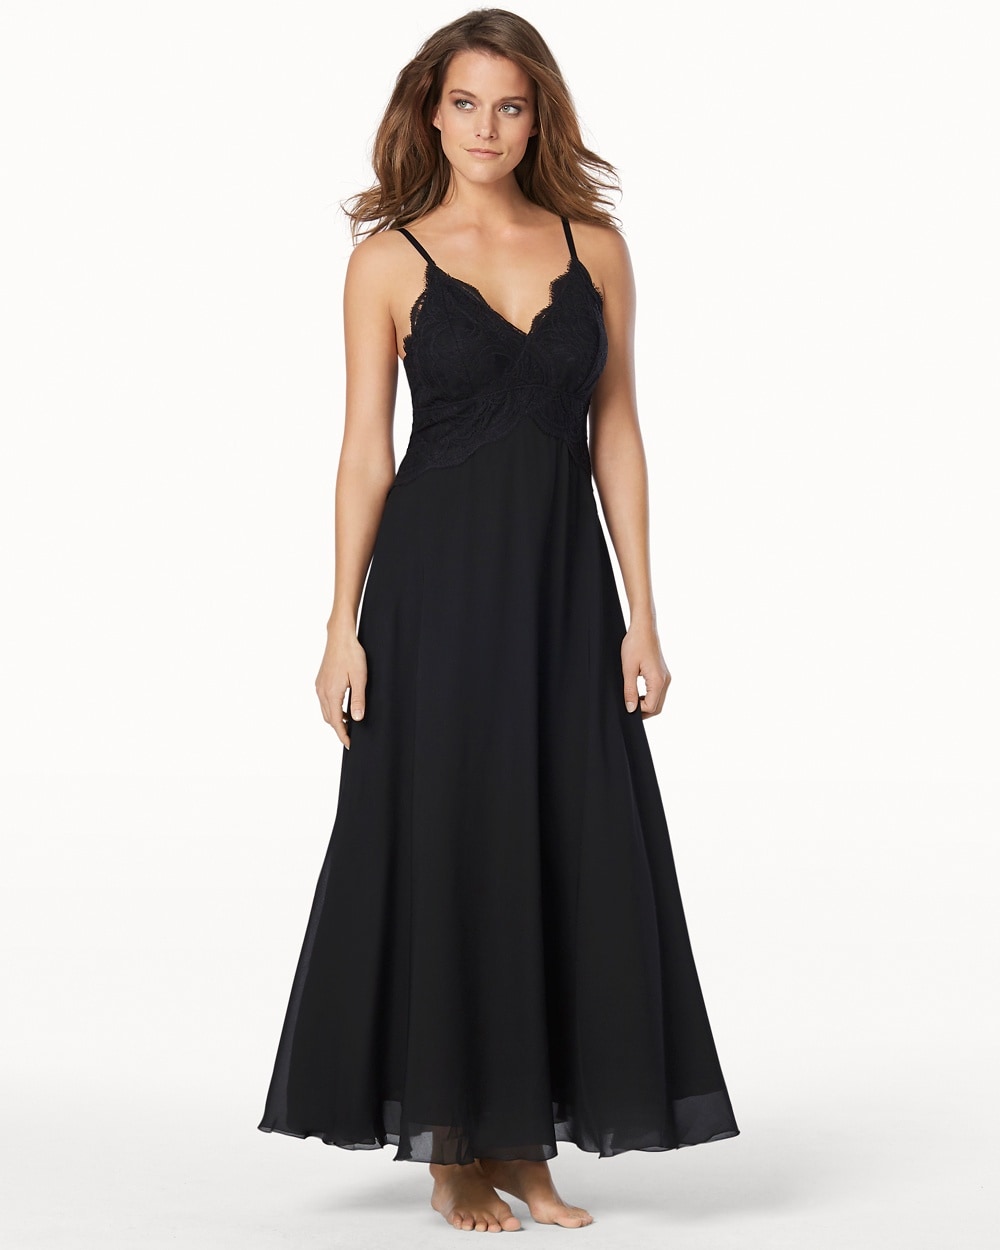 Enticing Lace Long Nightgown Black